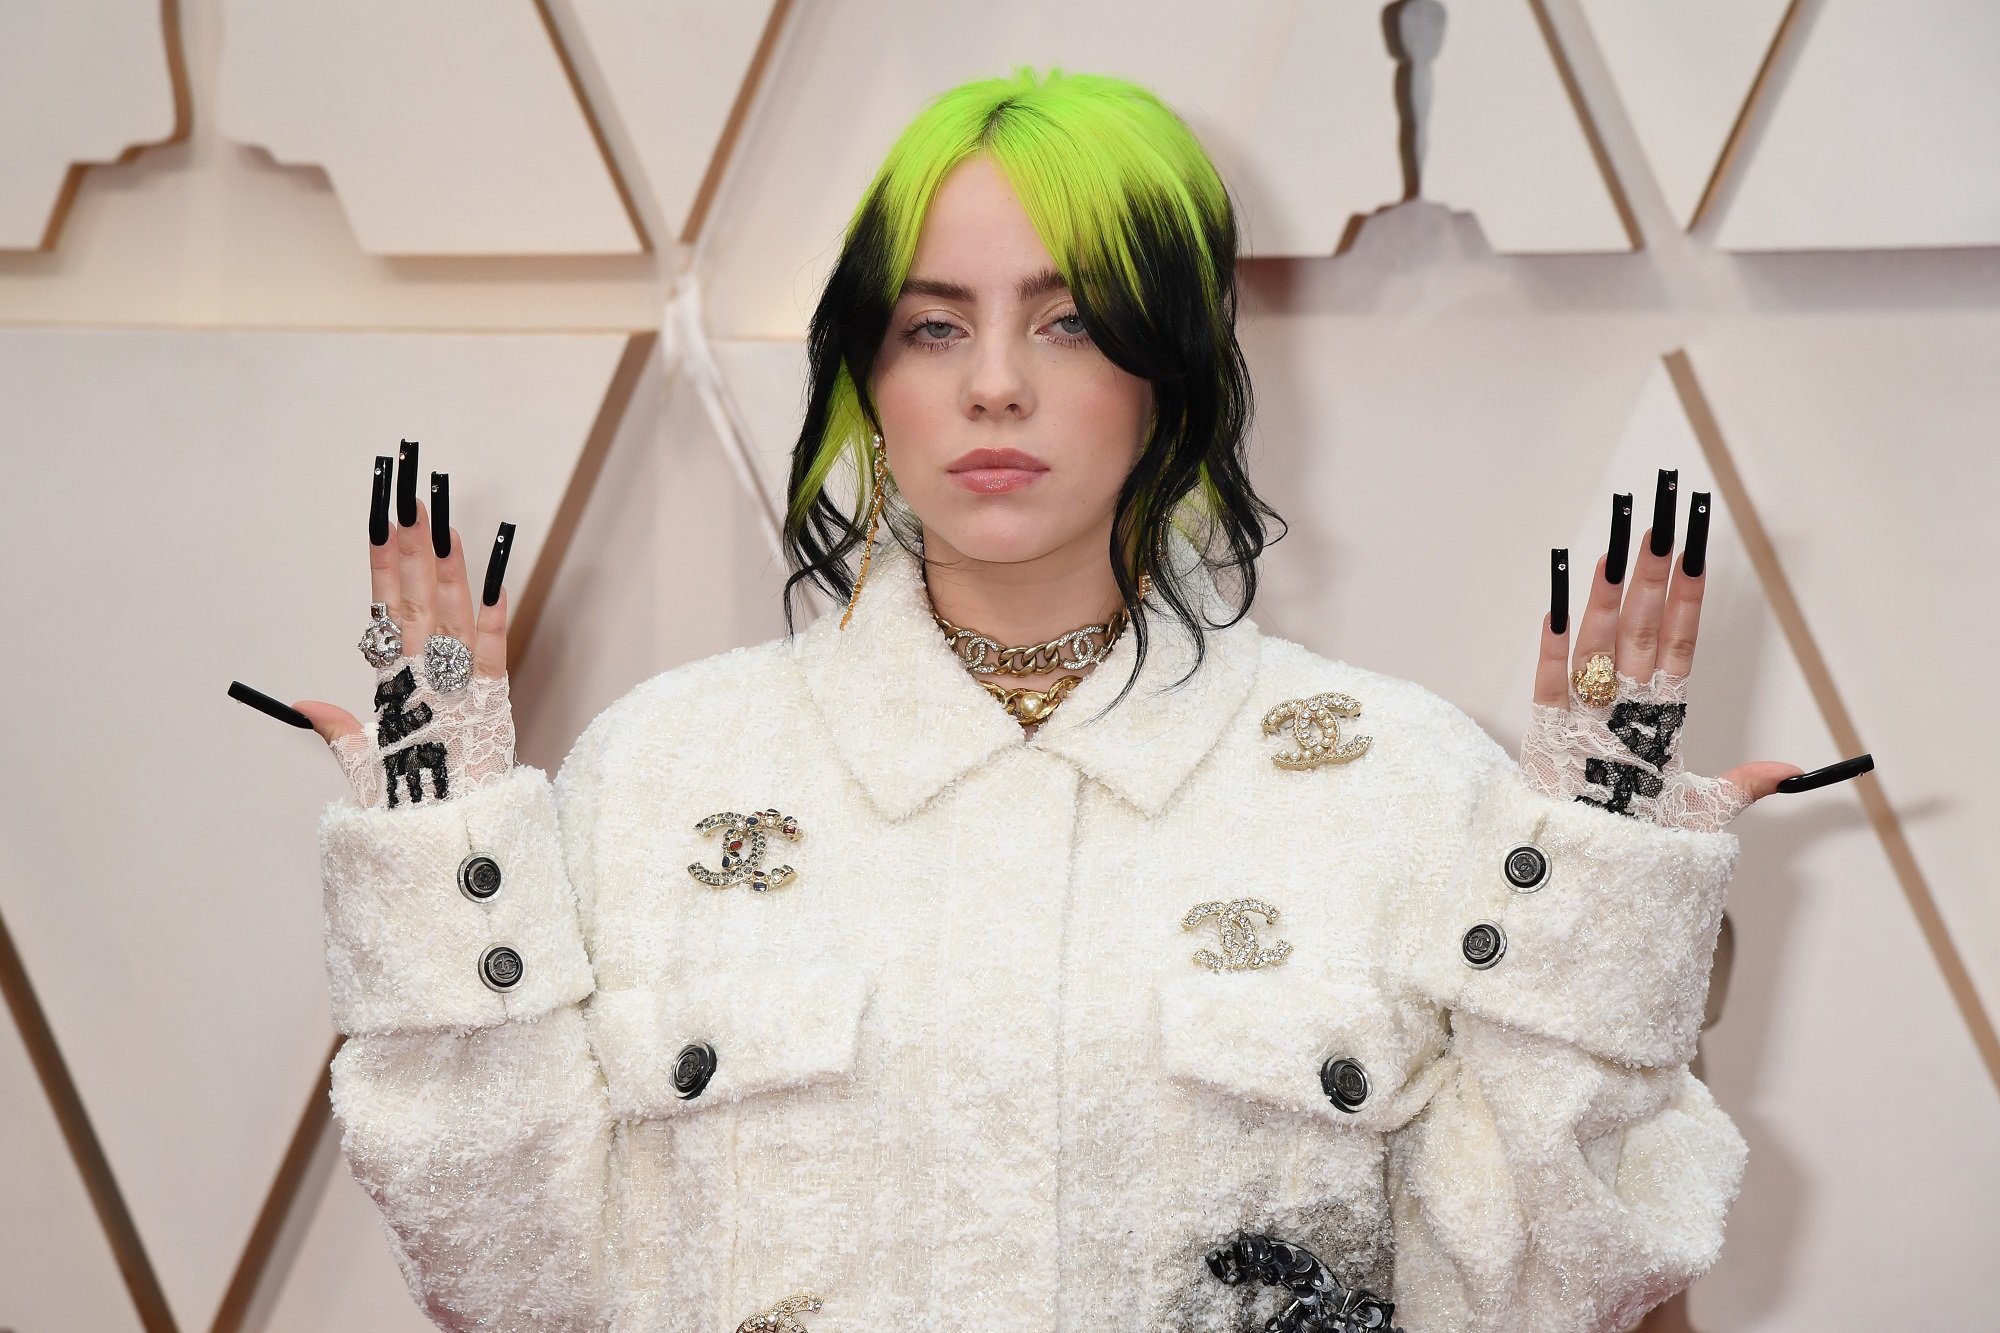 Billie Eilish attends the 92nd Annual Academy Awards on February 09, 2020 in Hollywood, California.